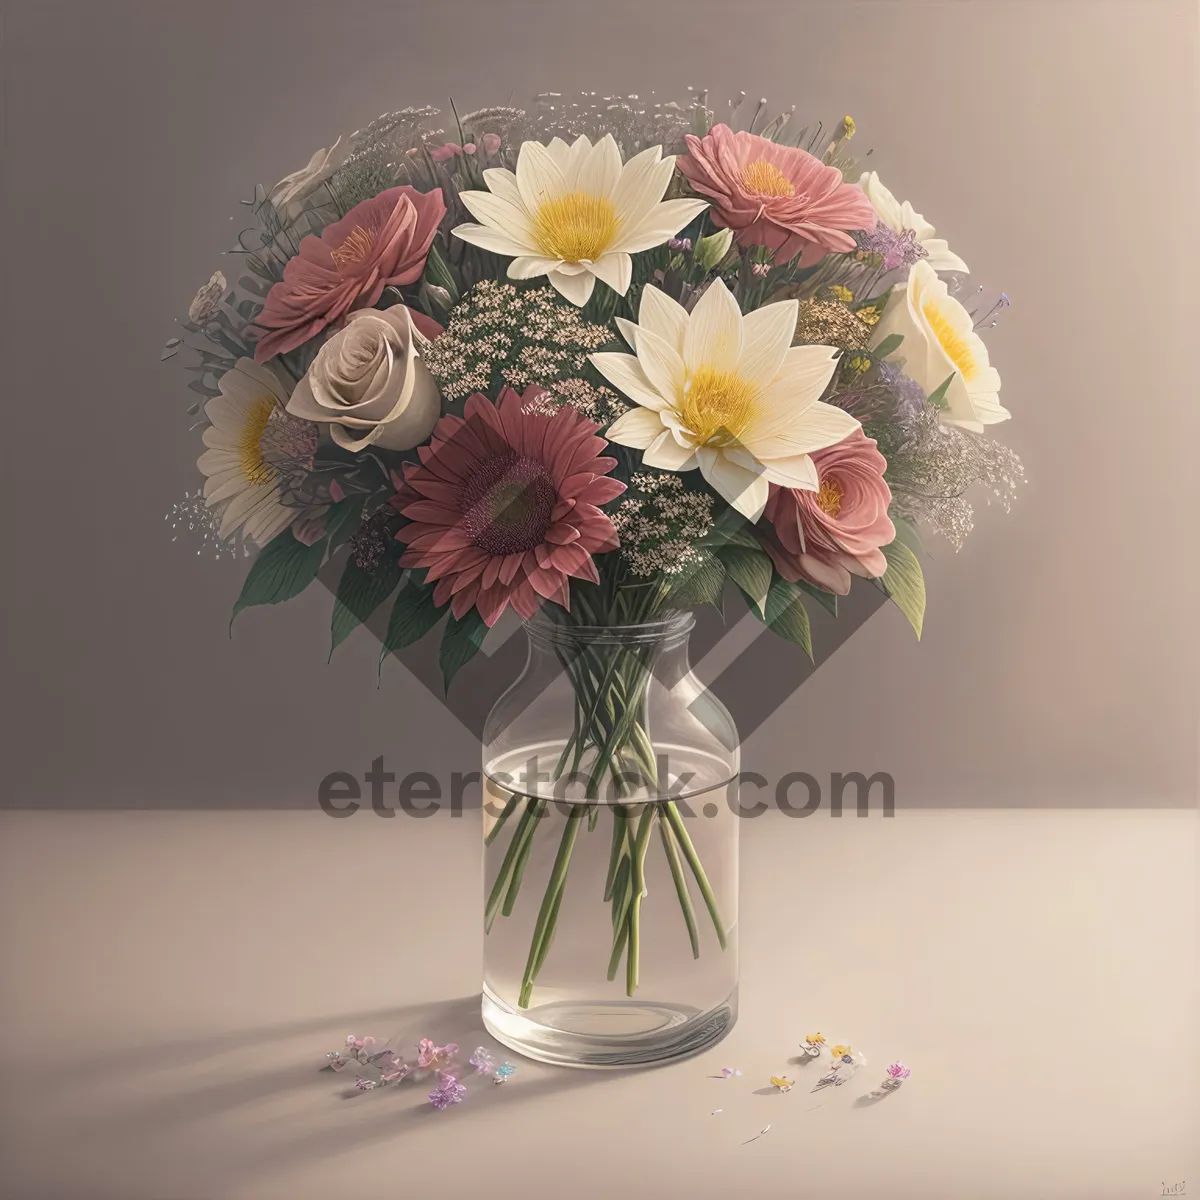 Picture of Colorful Floral Bouquet in Glass Vase